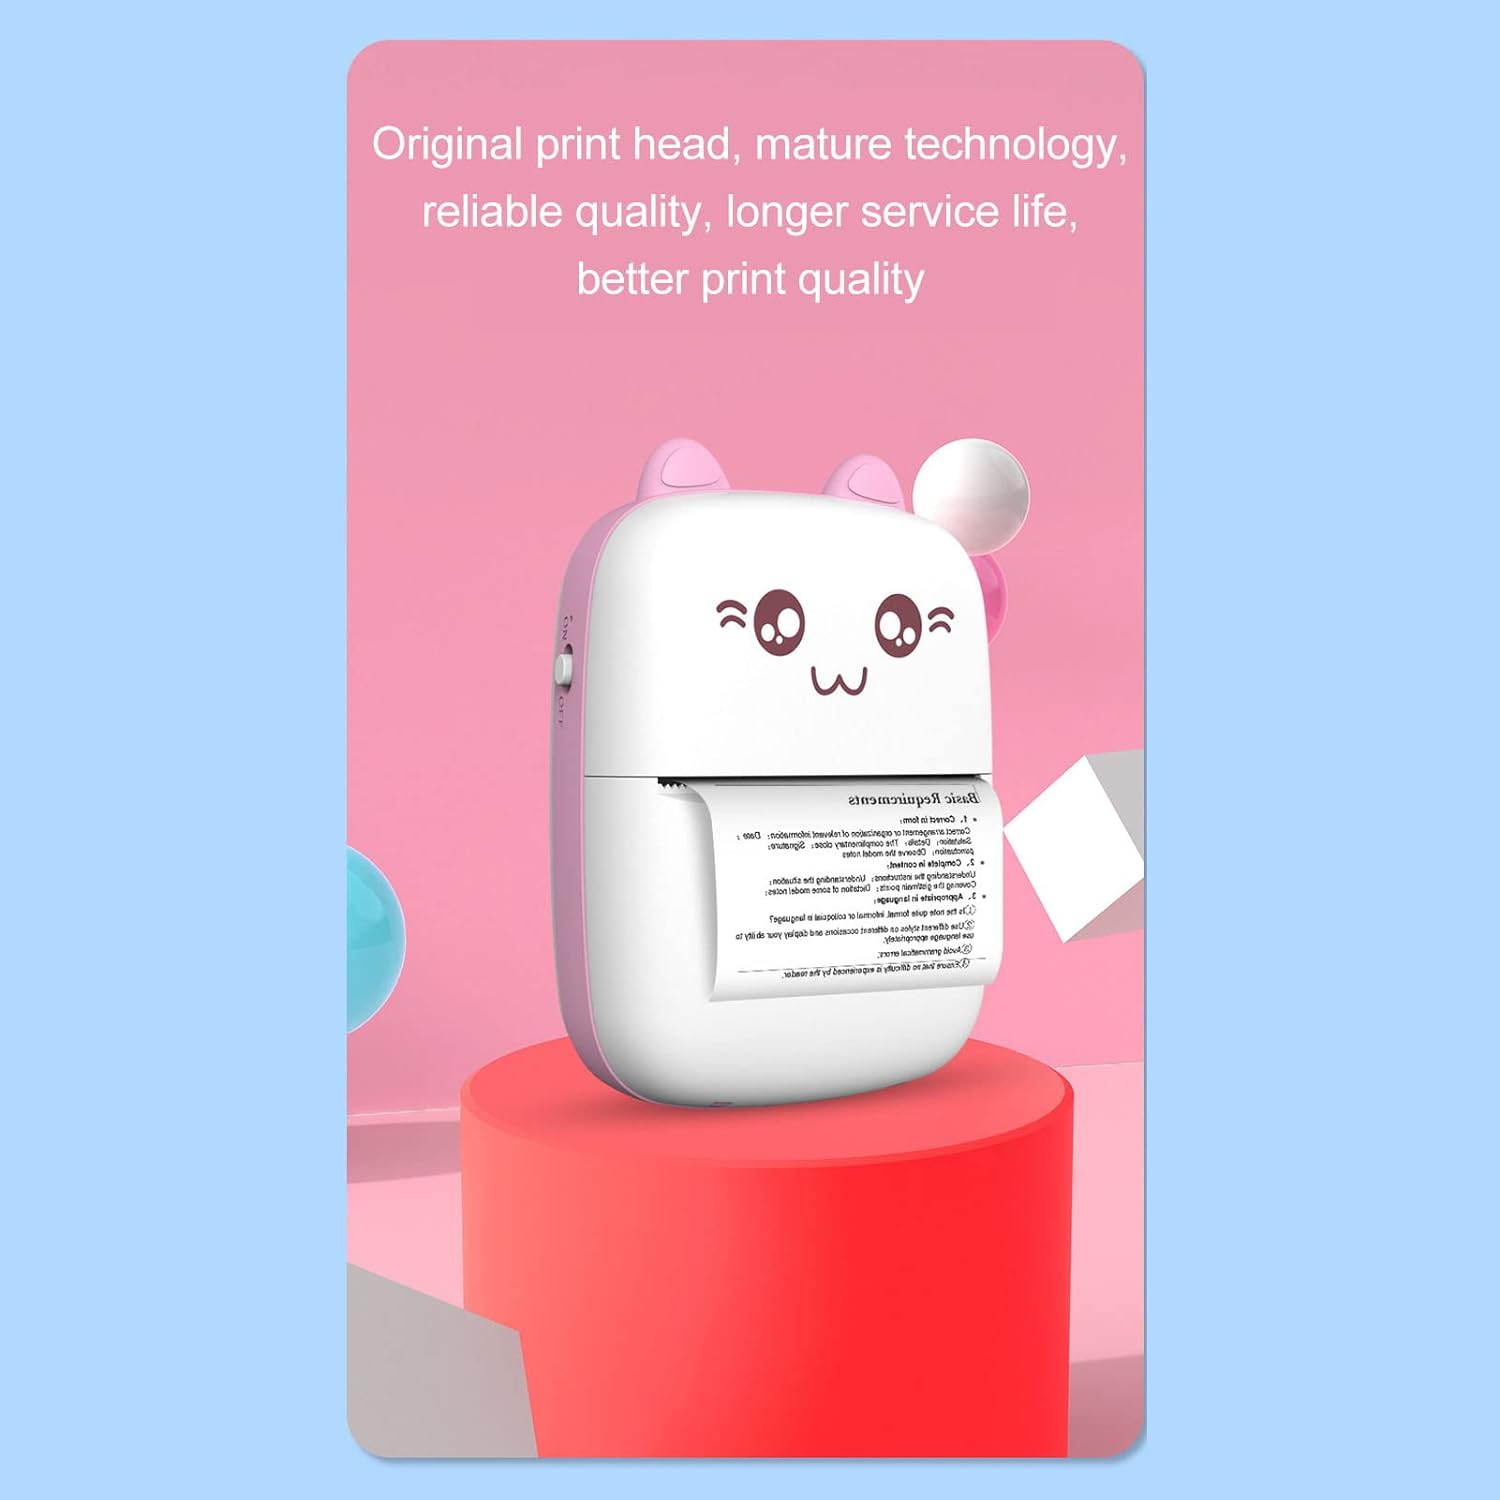 8838 Pocket Mini Printer, Mobile Phone Bluetooth Connection Wireless Mini Thermal Printer with Android or iOS APP for Pictures, Portable Smart Printer,Contains 1 Rolls Thermal Paper, with Fast Paper Output for Photo Image